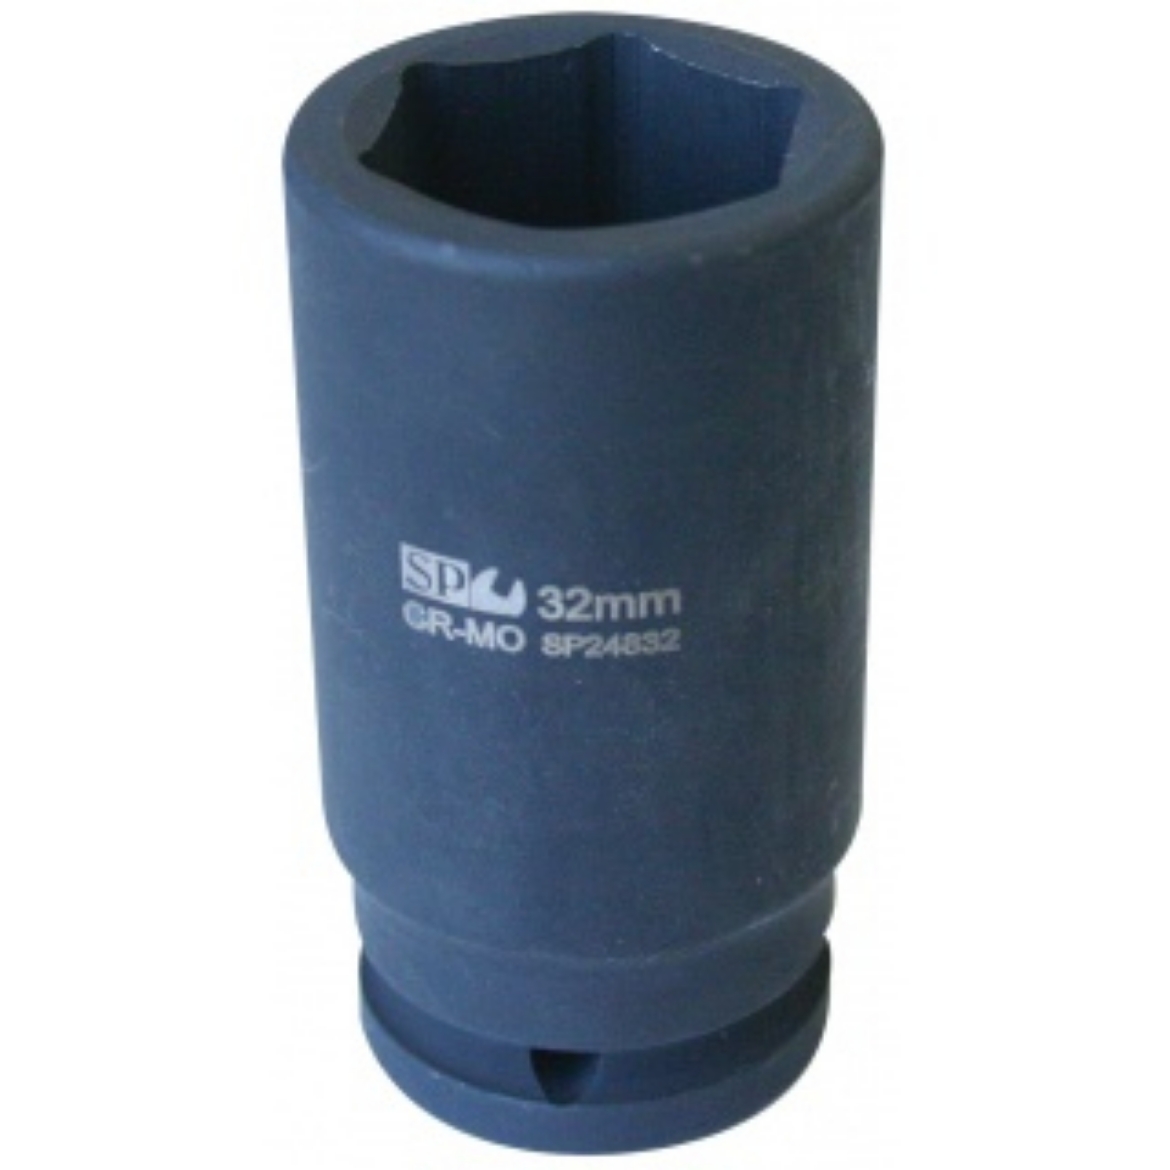 Picture of SOCKET IMPACT 3/4"DR 6PT DEEP METRIC 35MM SP TOOLS